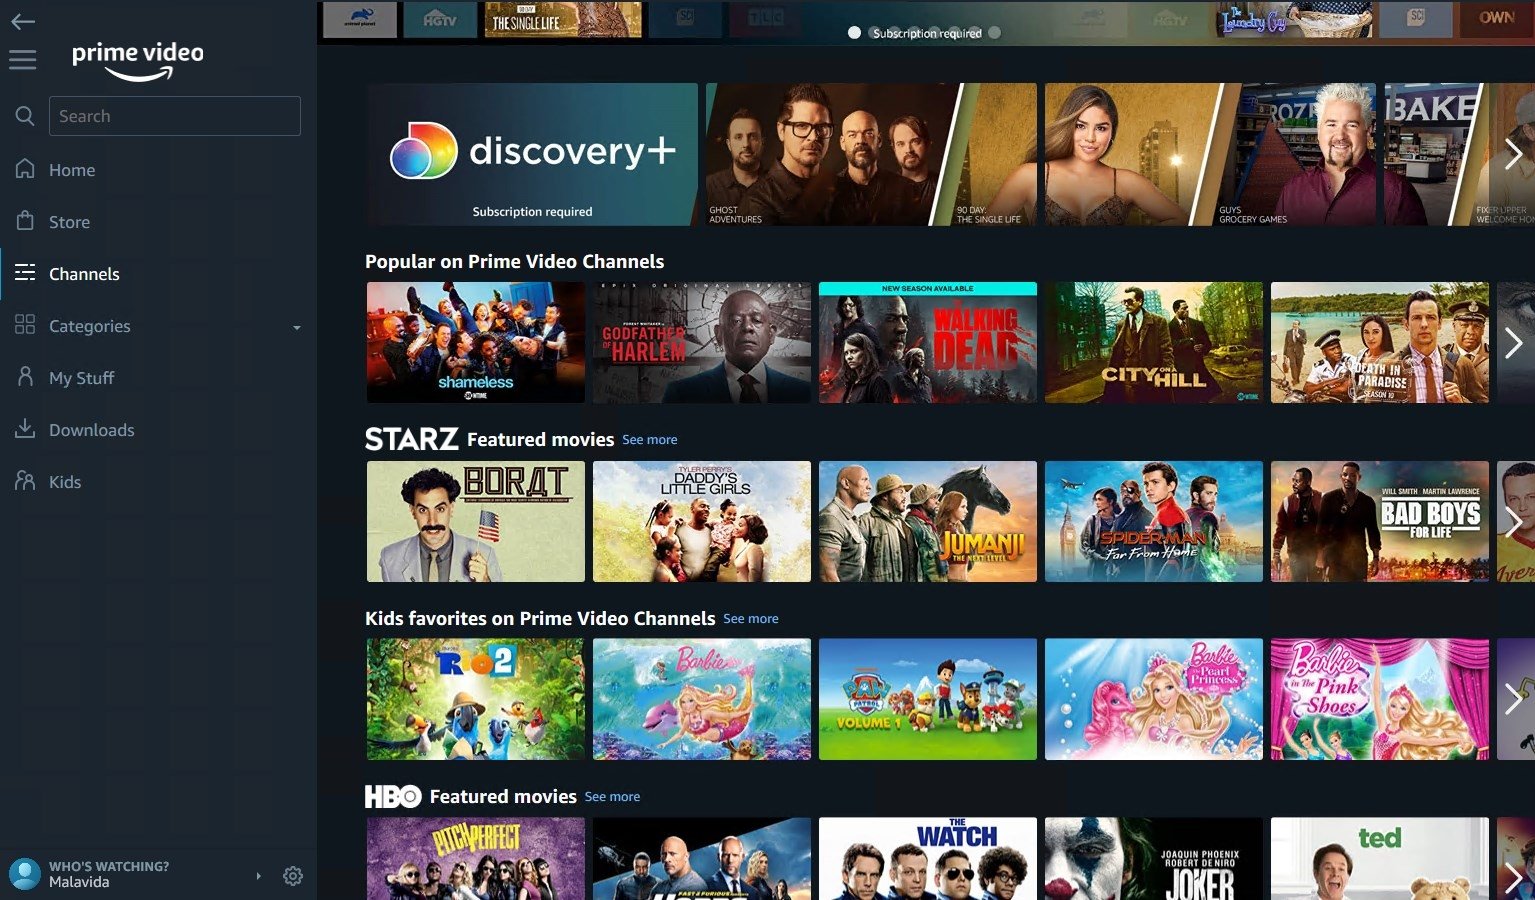 How To Watch On Amazon Video